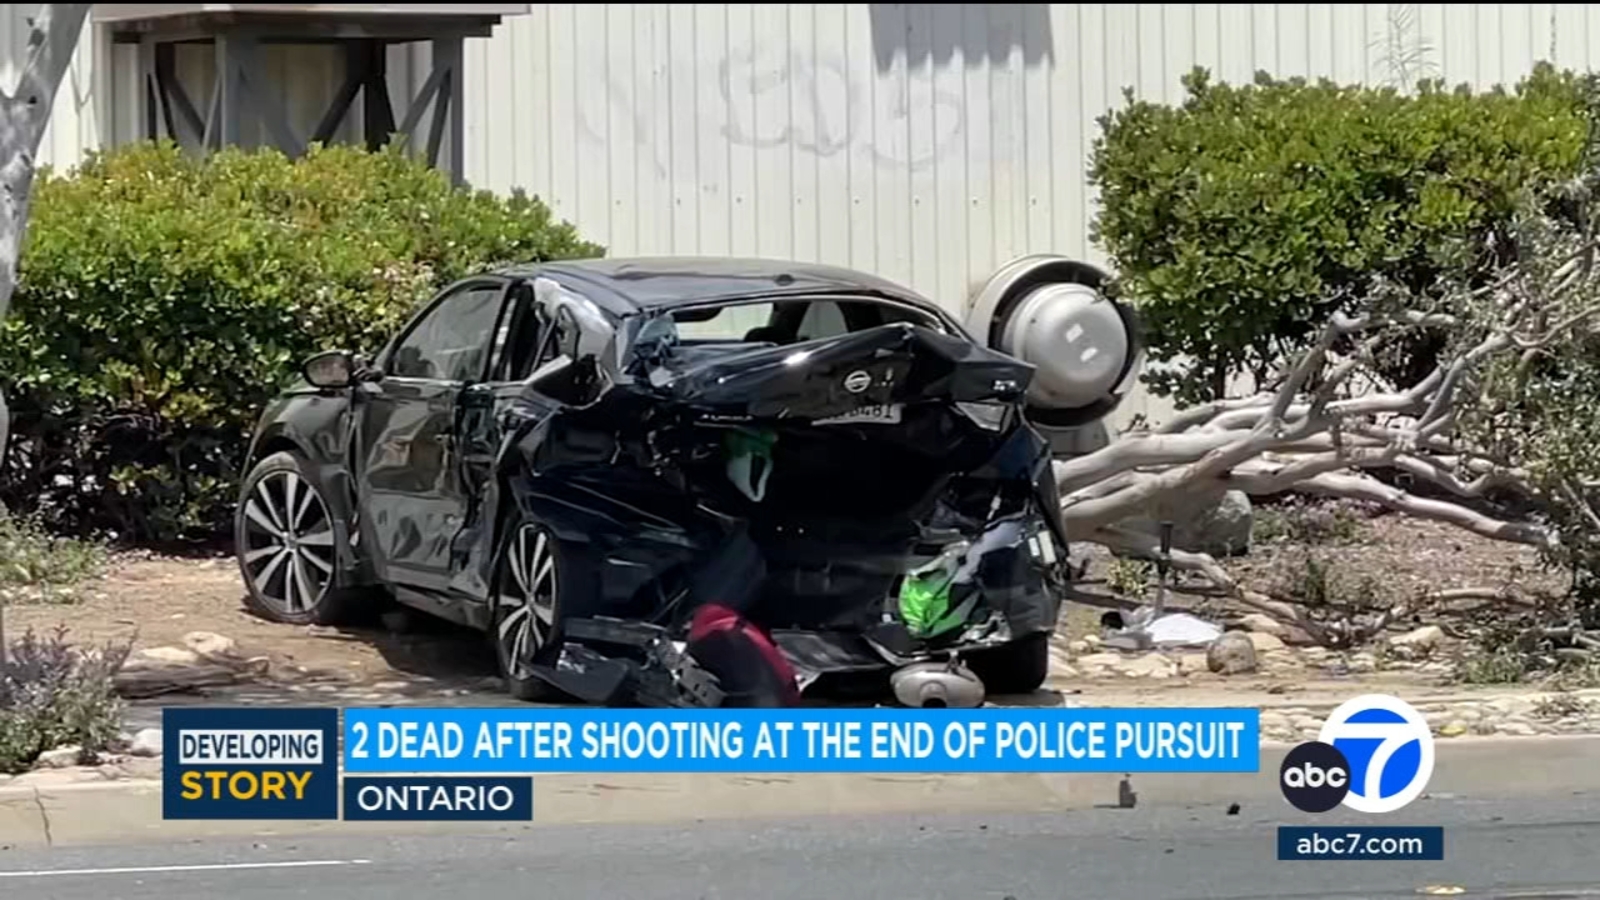 Innocent driver, suspect dead after police chase, officer-involved shooting in Ontario [Video]